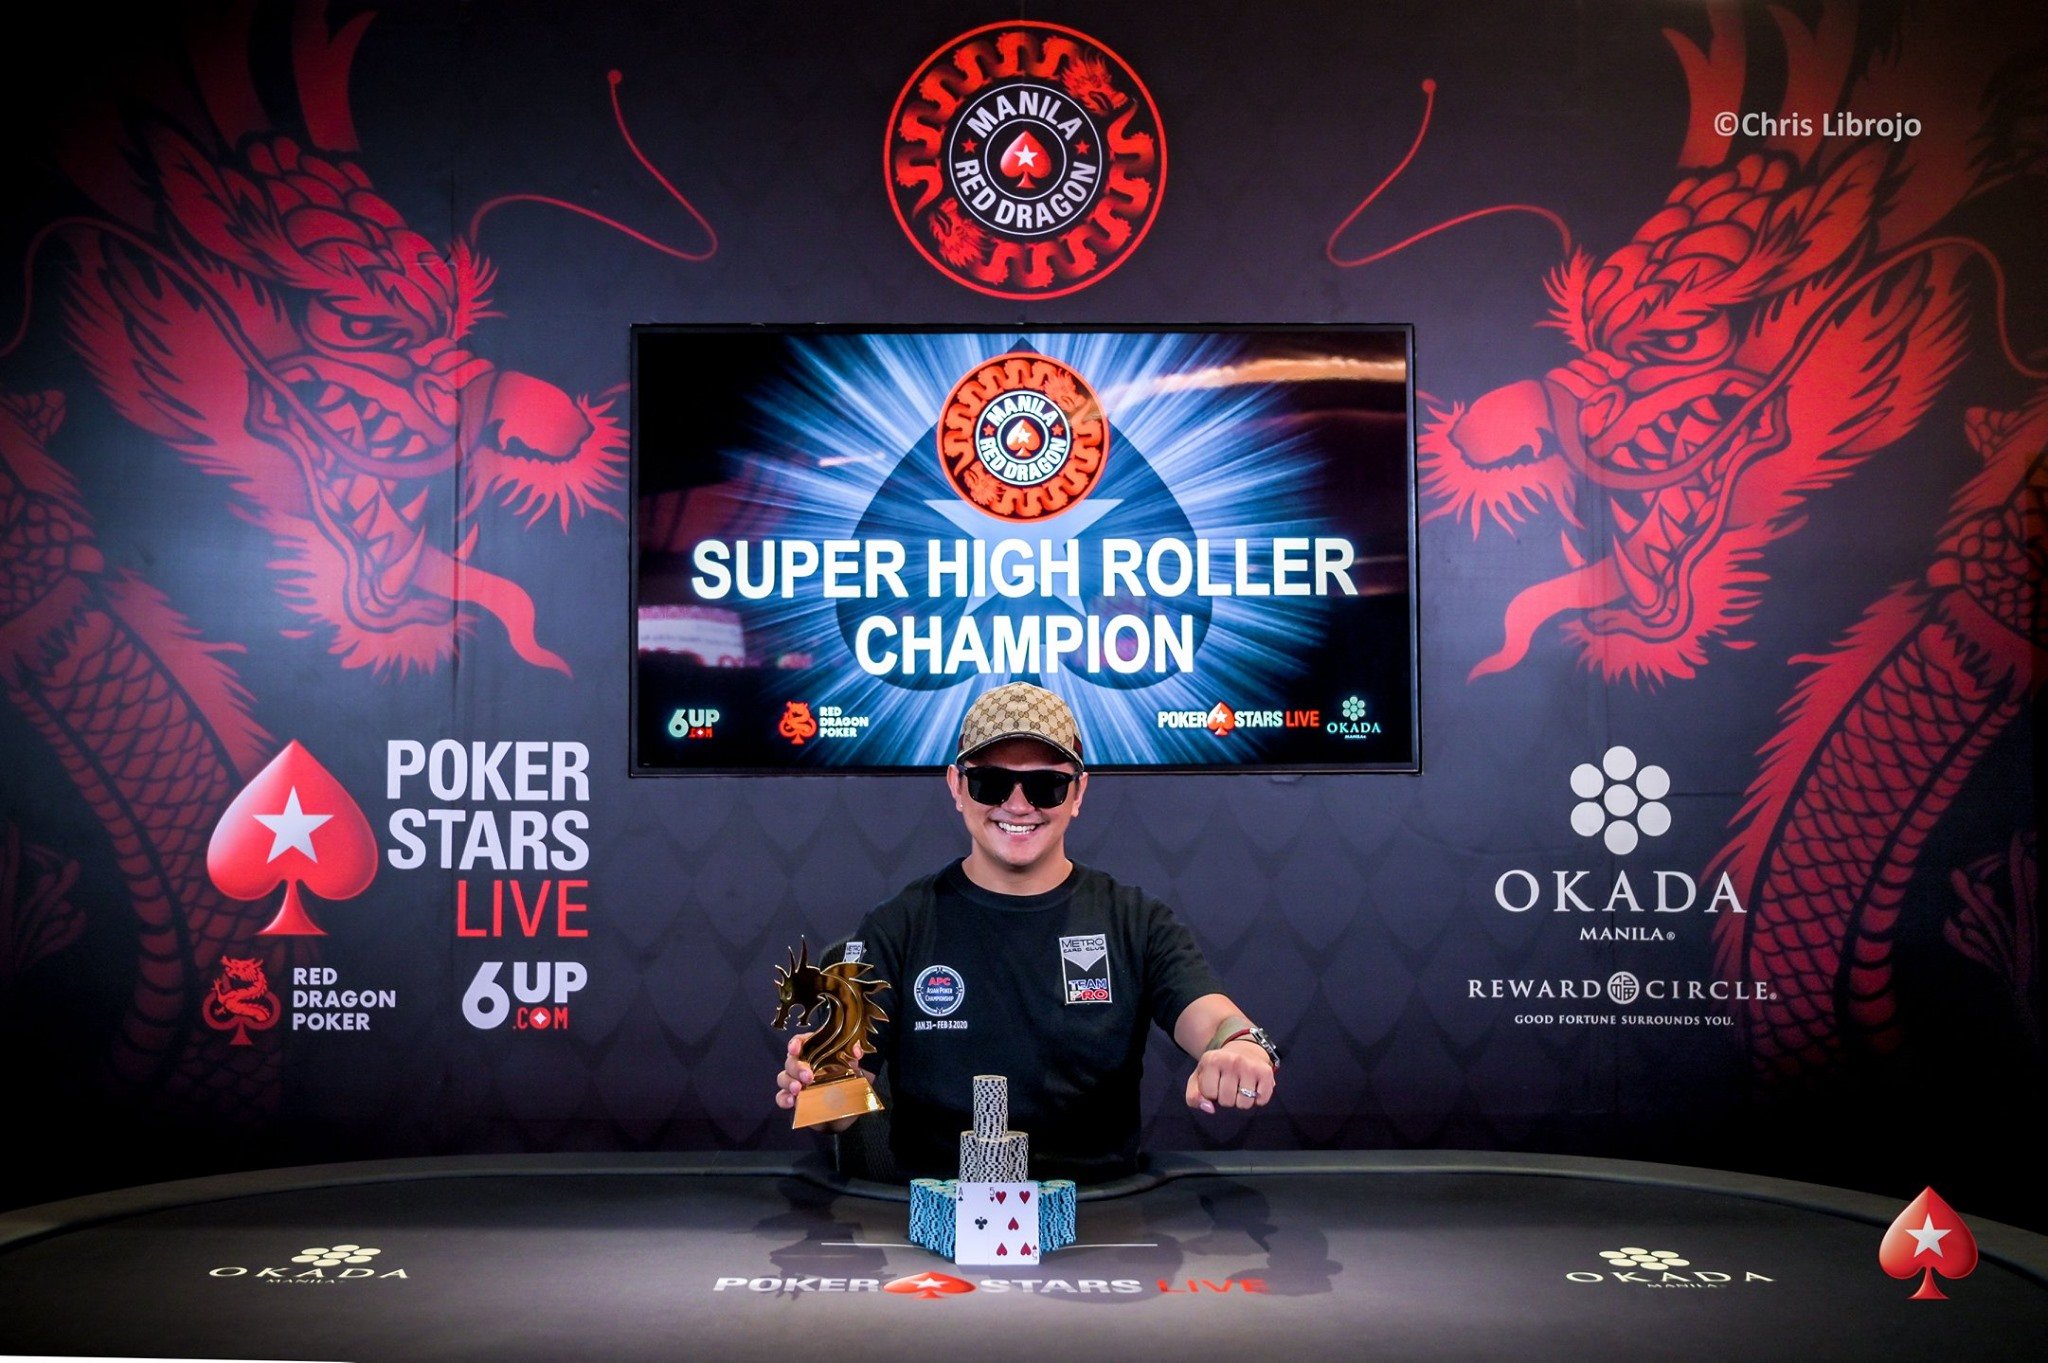 Red dragon Manila: Lester Edoc takes down Super High Roller for US$102,125; Sahil Agarwal wins Kickoff